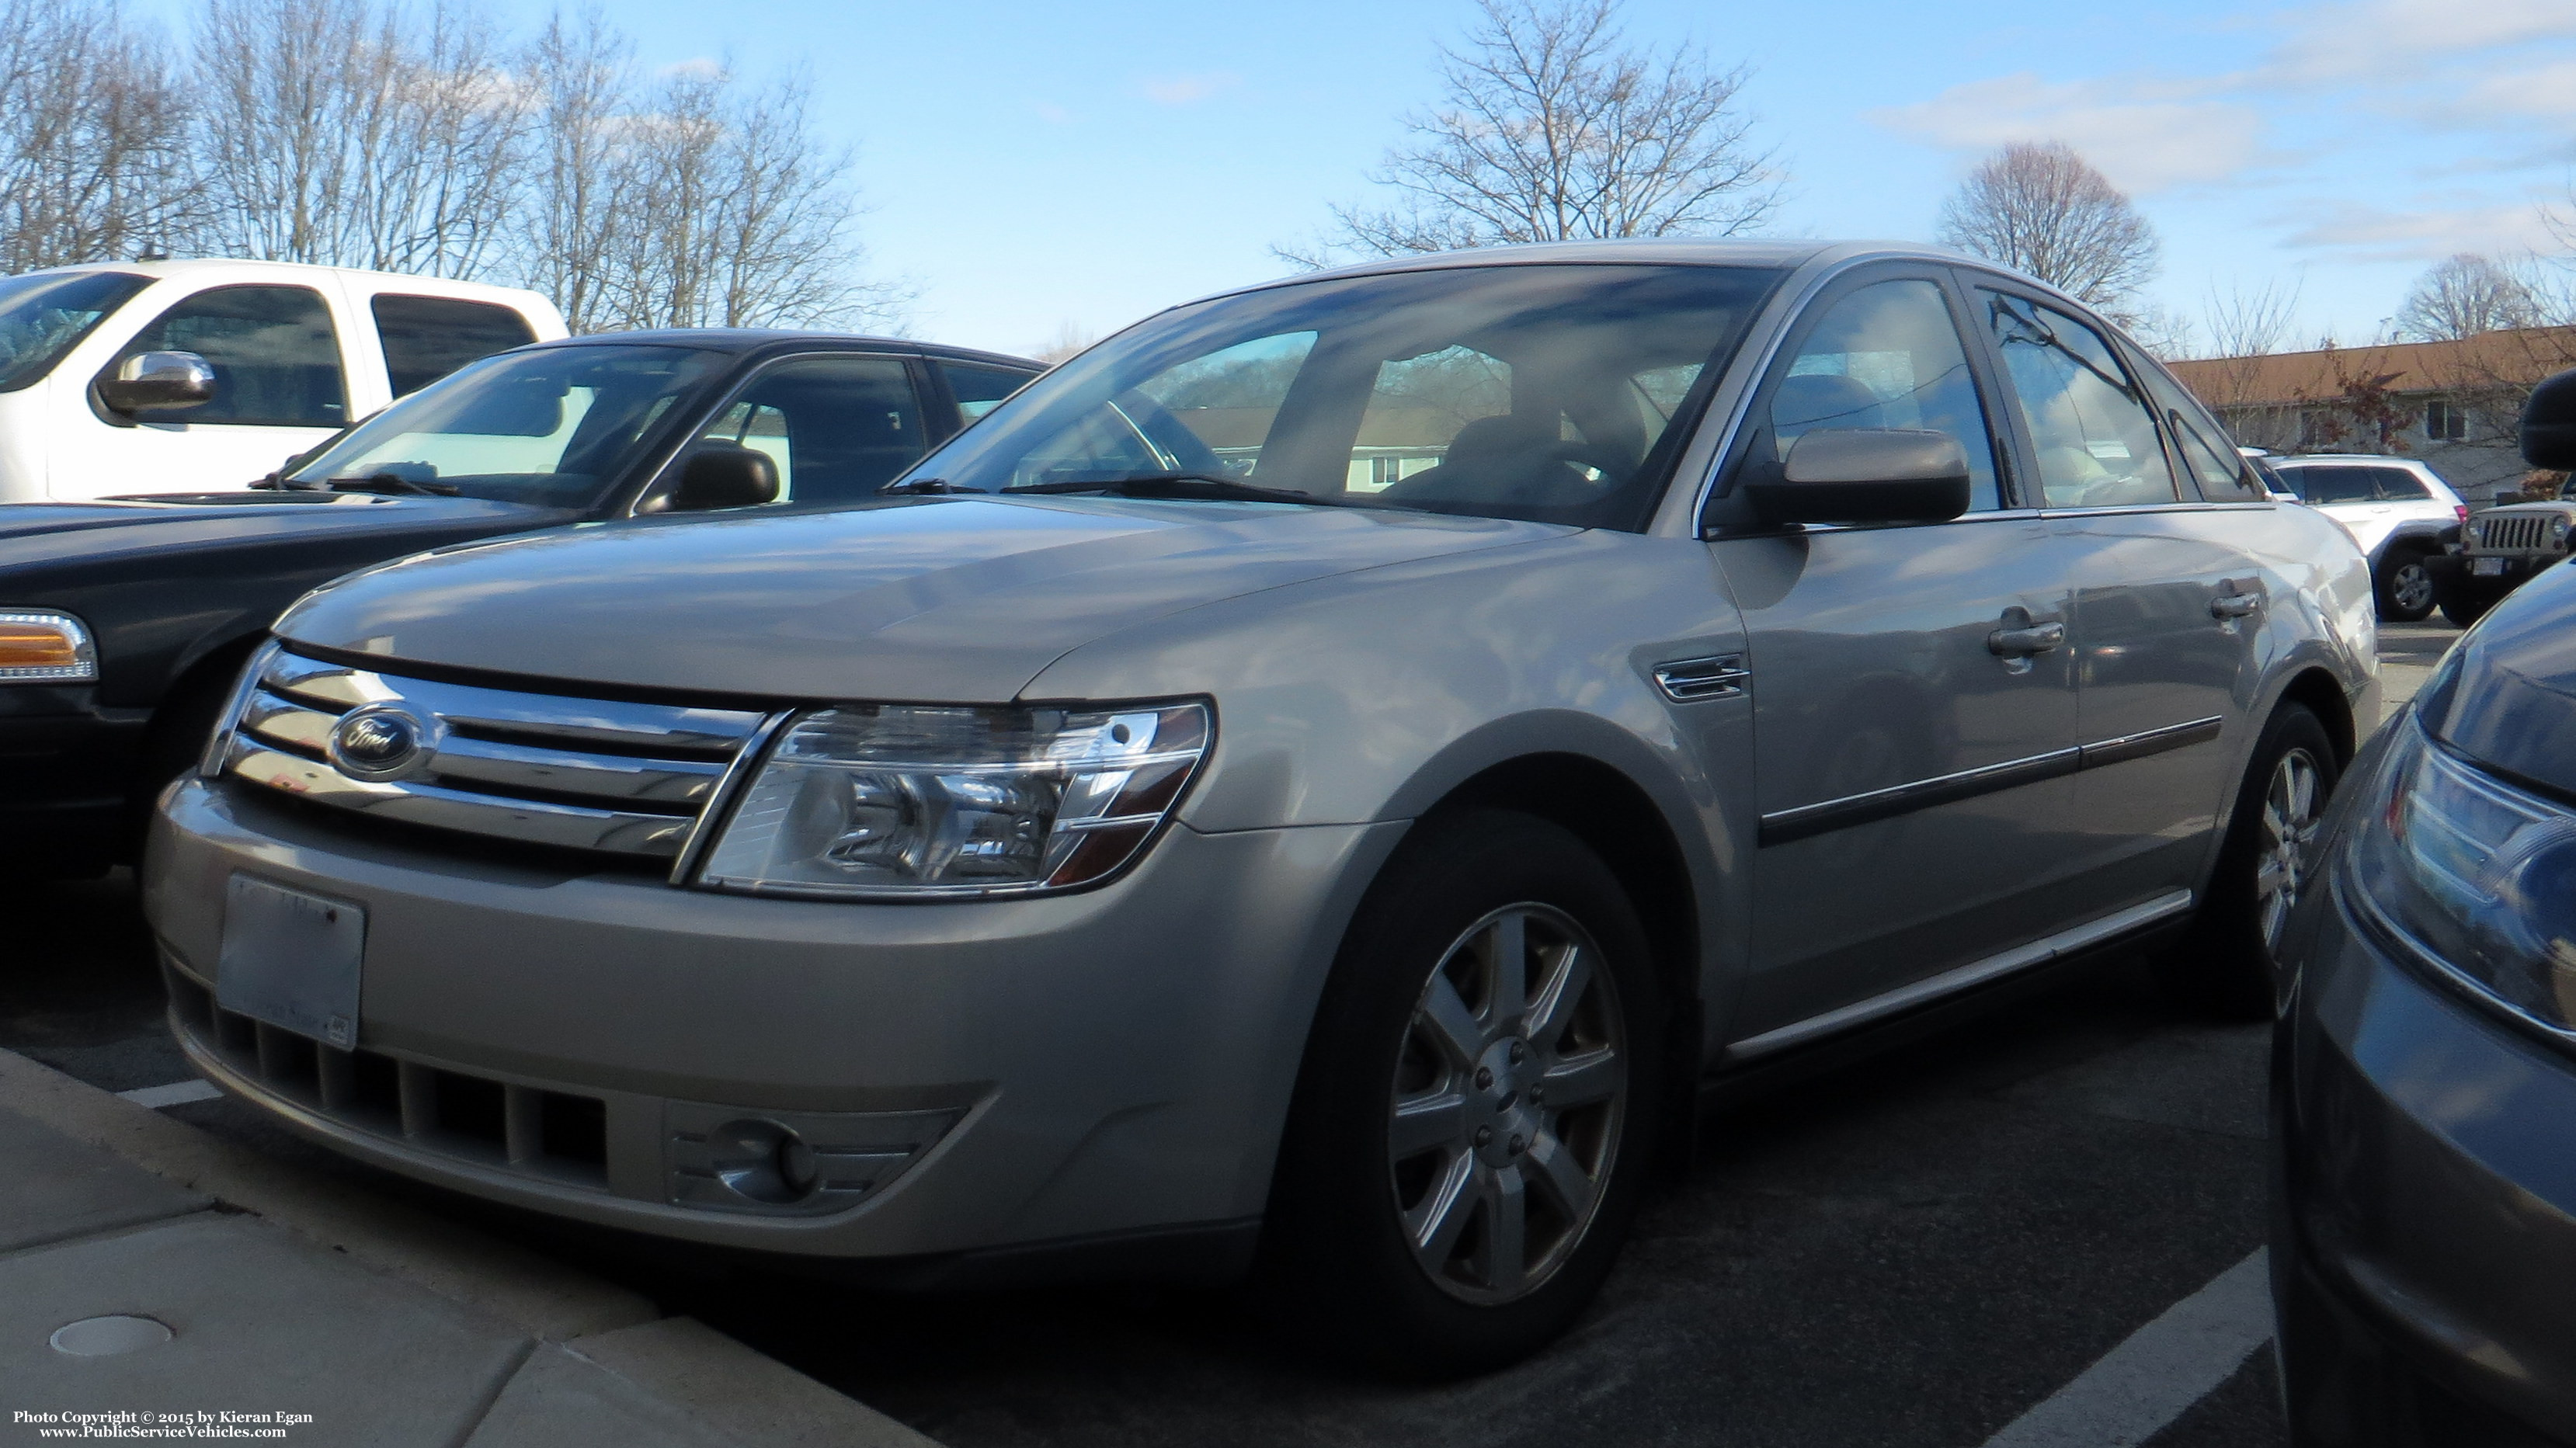 A photo  of North Kingstown Police
            Captain's Unit, a 2008-2009 Ford Taurus             taken by Kieran Egan